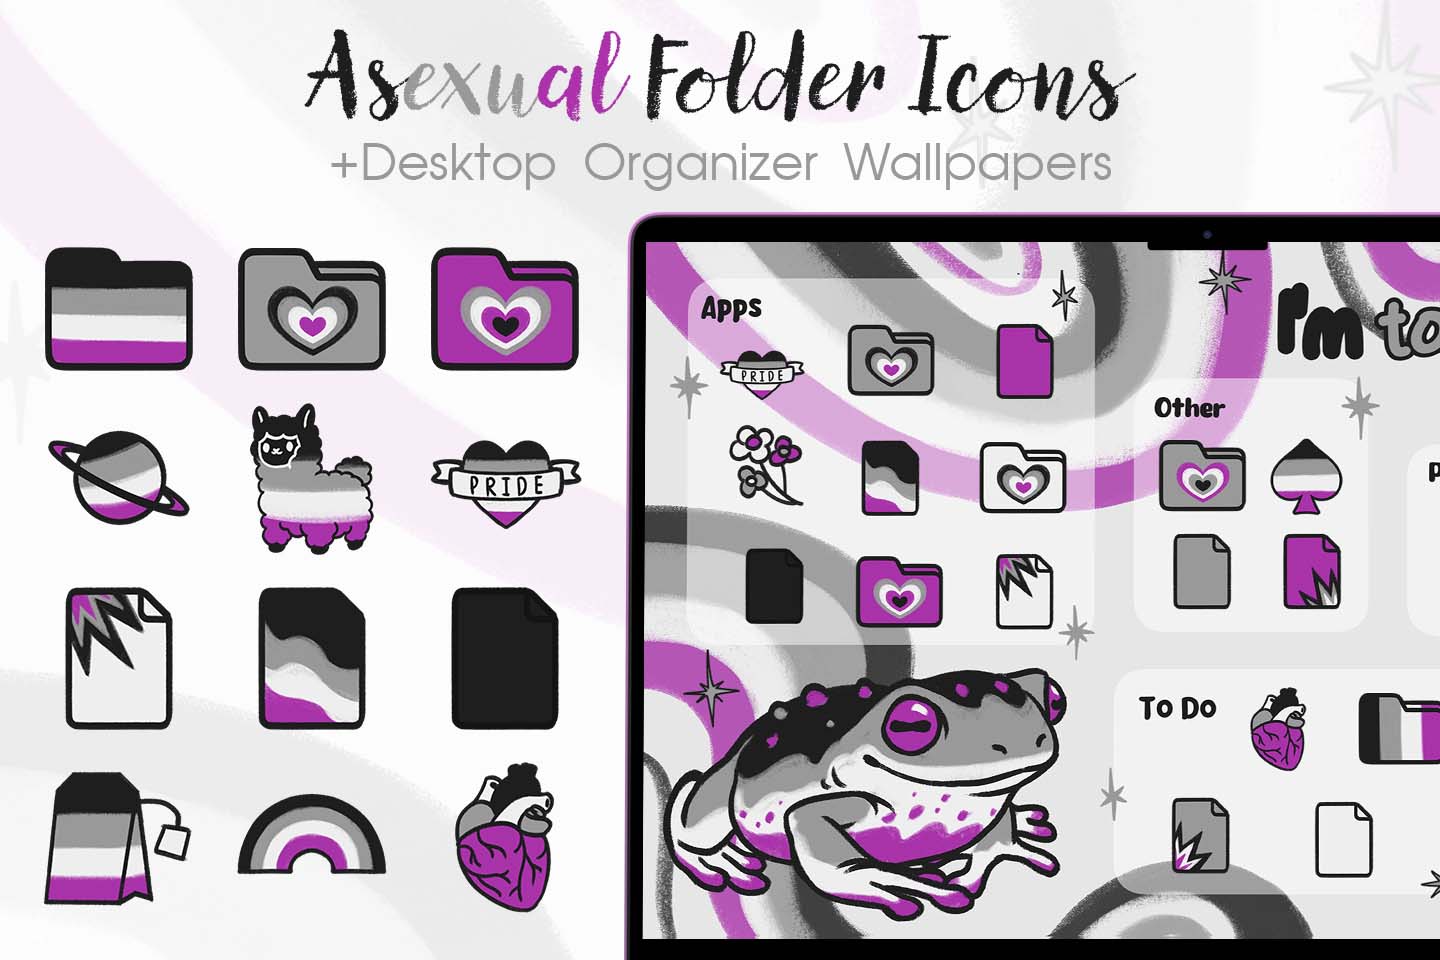 asexual folder icons pack